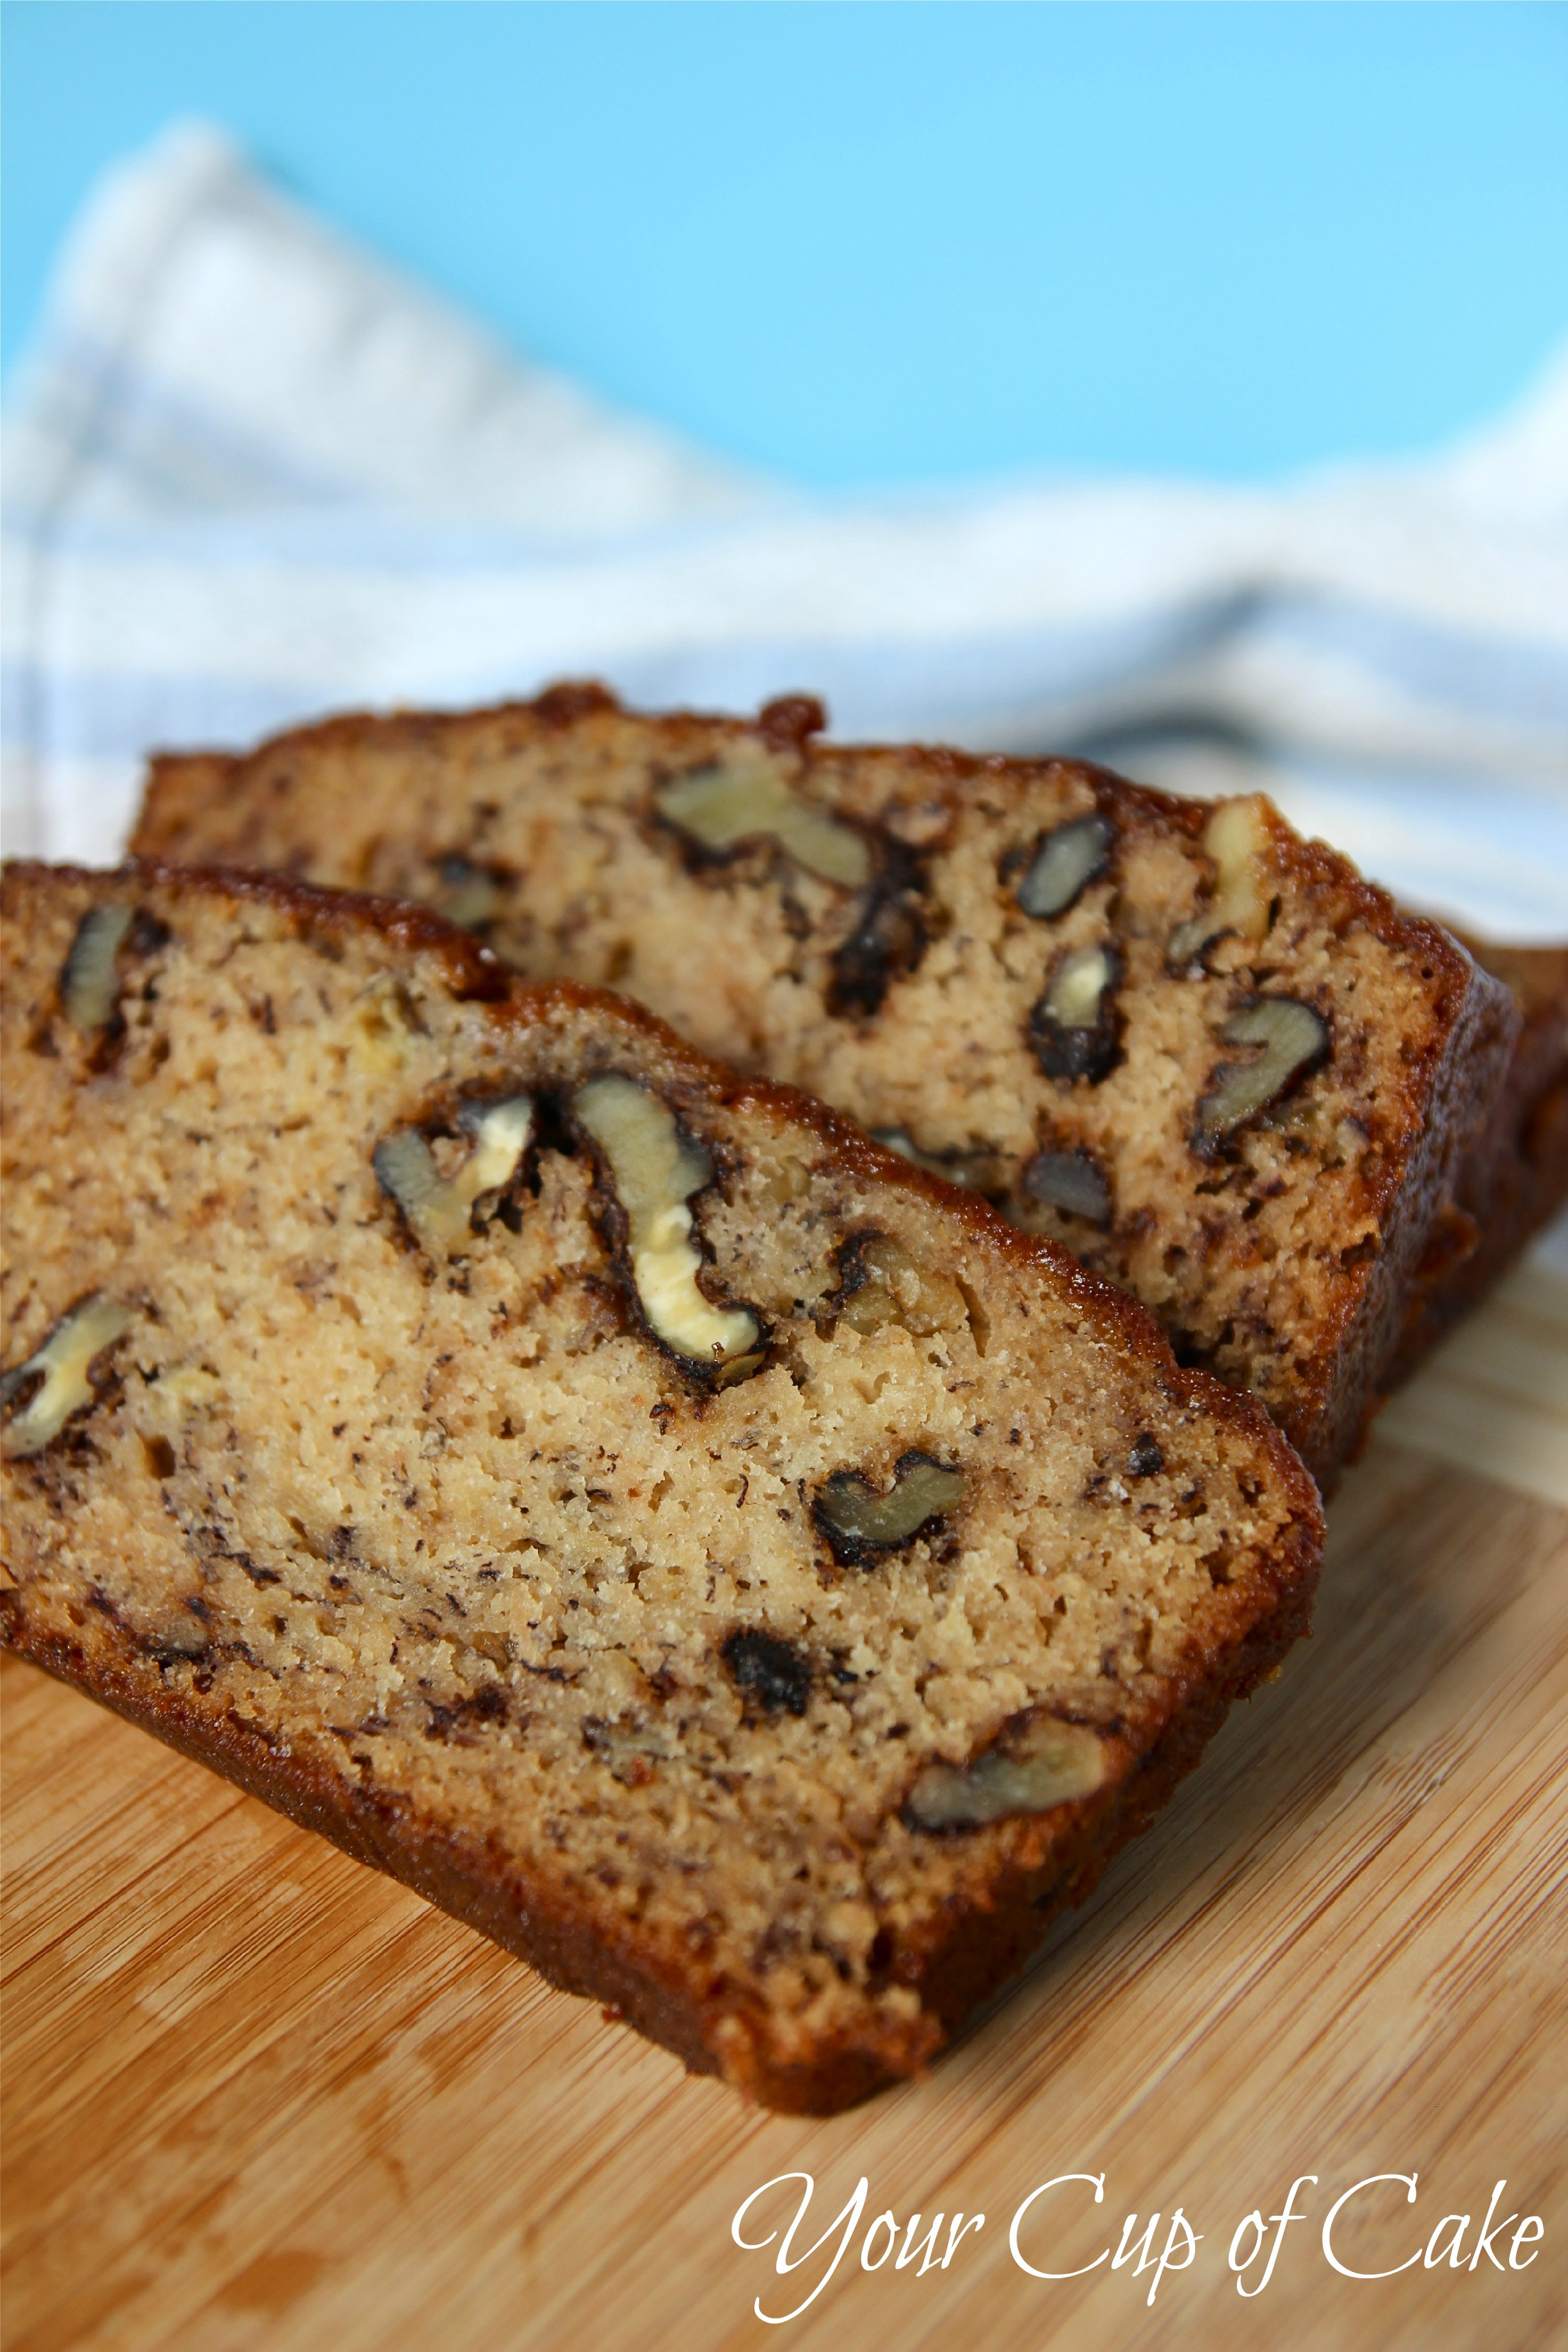 Banana Bread Recipe Best
 The Best Banana Bread Your Cup of Cake